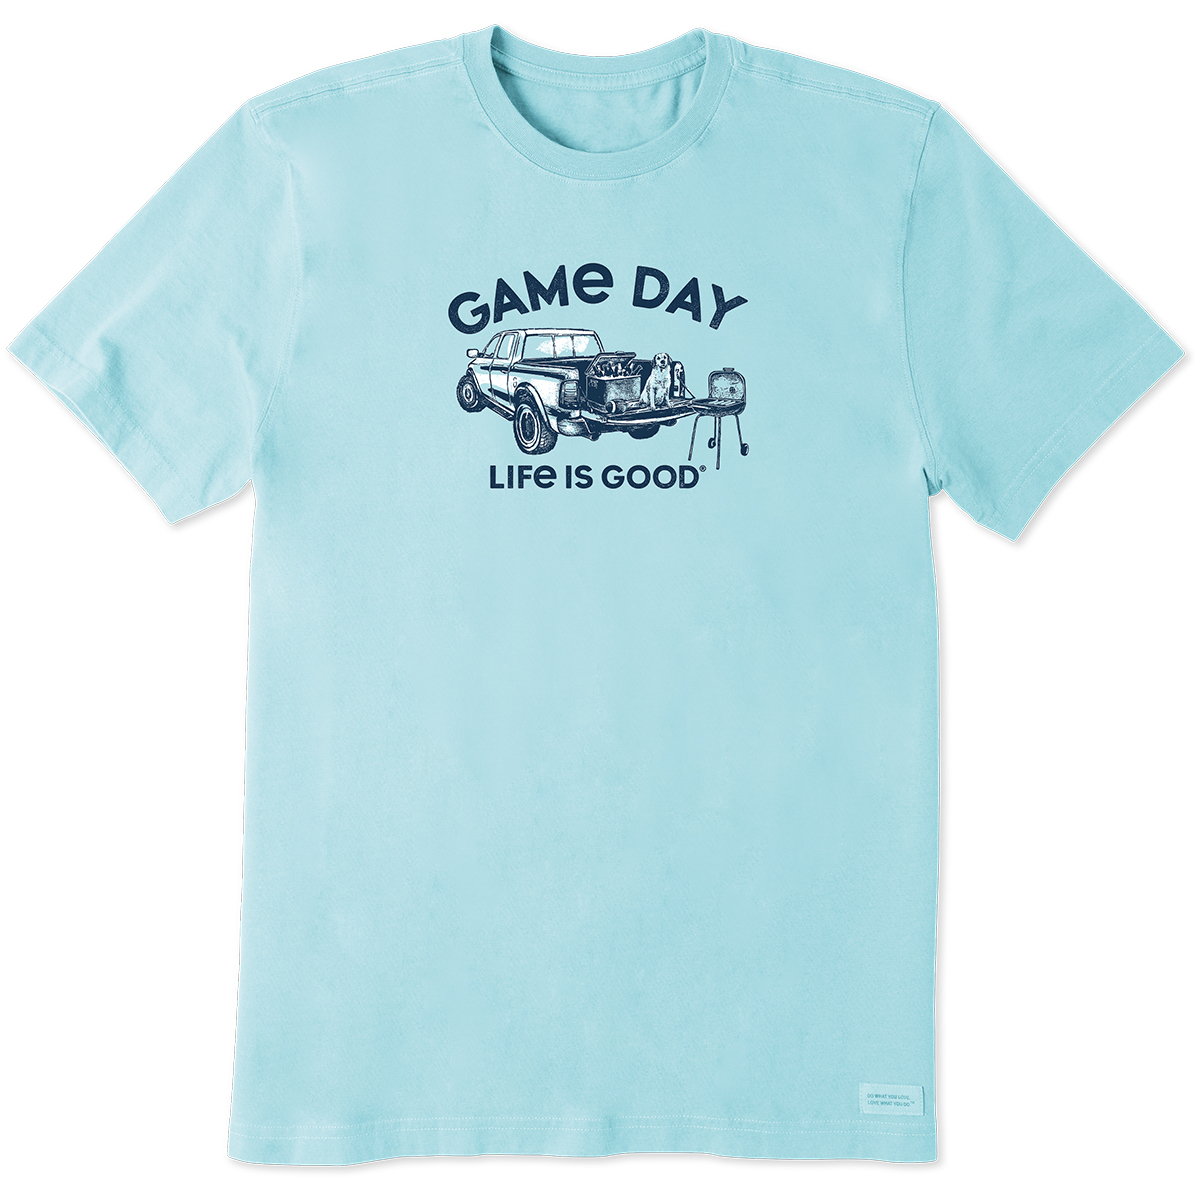 Life Is Good Men's Game Day Tee - Blue, XXL